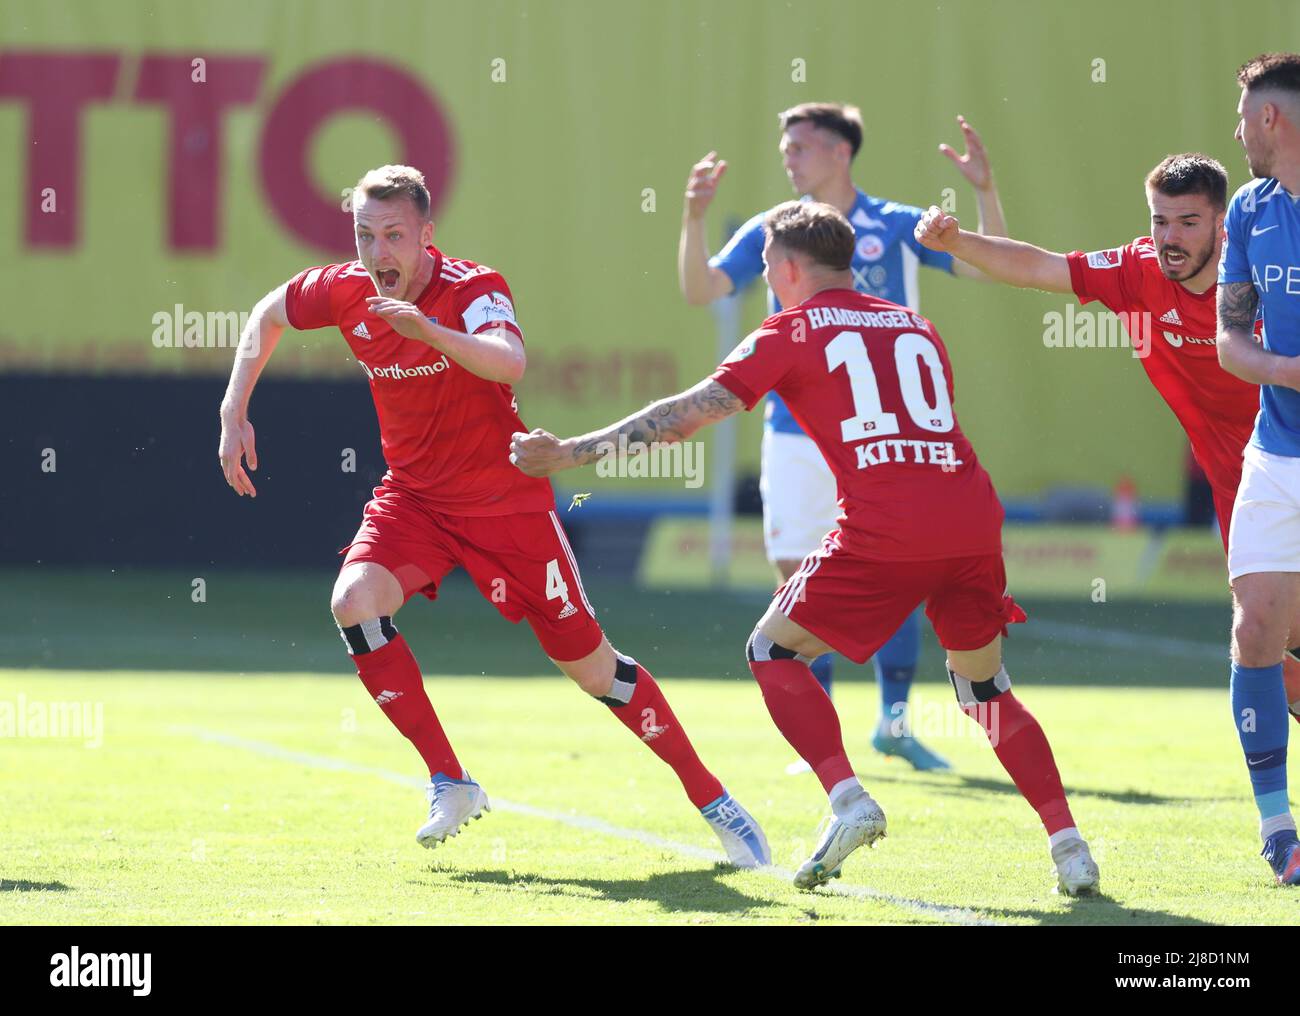 15 May 2022, Mecklenburg-Western Pomerania, Rostock: Soccer: 2nd Bundesliga, Hansa Rostock - Hamburger SV, Matchday 34, Ostseestadion. Sebastian Schonlau (left) of Hamburger SV celebrates the goal to make it 1:2. Photo: Danny Gohlke/dpa - IMPORTANT NOTE: In accordance with the requirements of the DFL Deutsche Fußball Liga and the DFB Deutscher Fußball-Bund, it is prohibited to use or have used photographs taken in the stadium and/or of the match in the form of sequence pictures and/or video-like photo series. Stock Photo